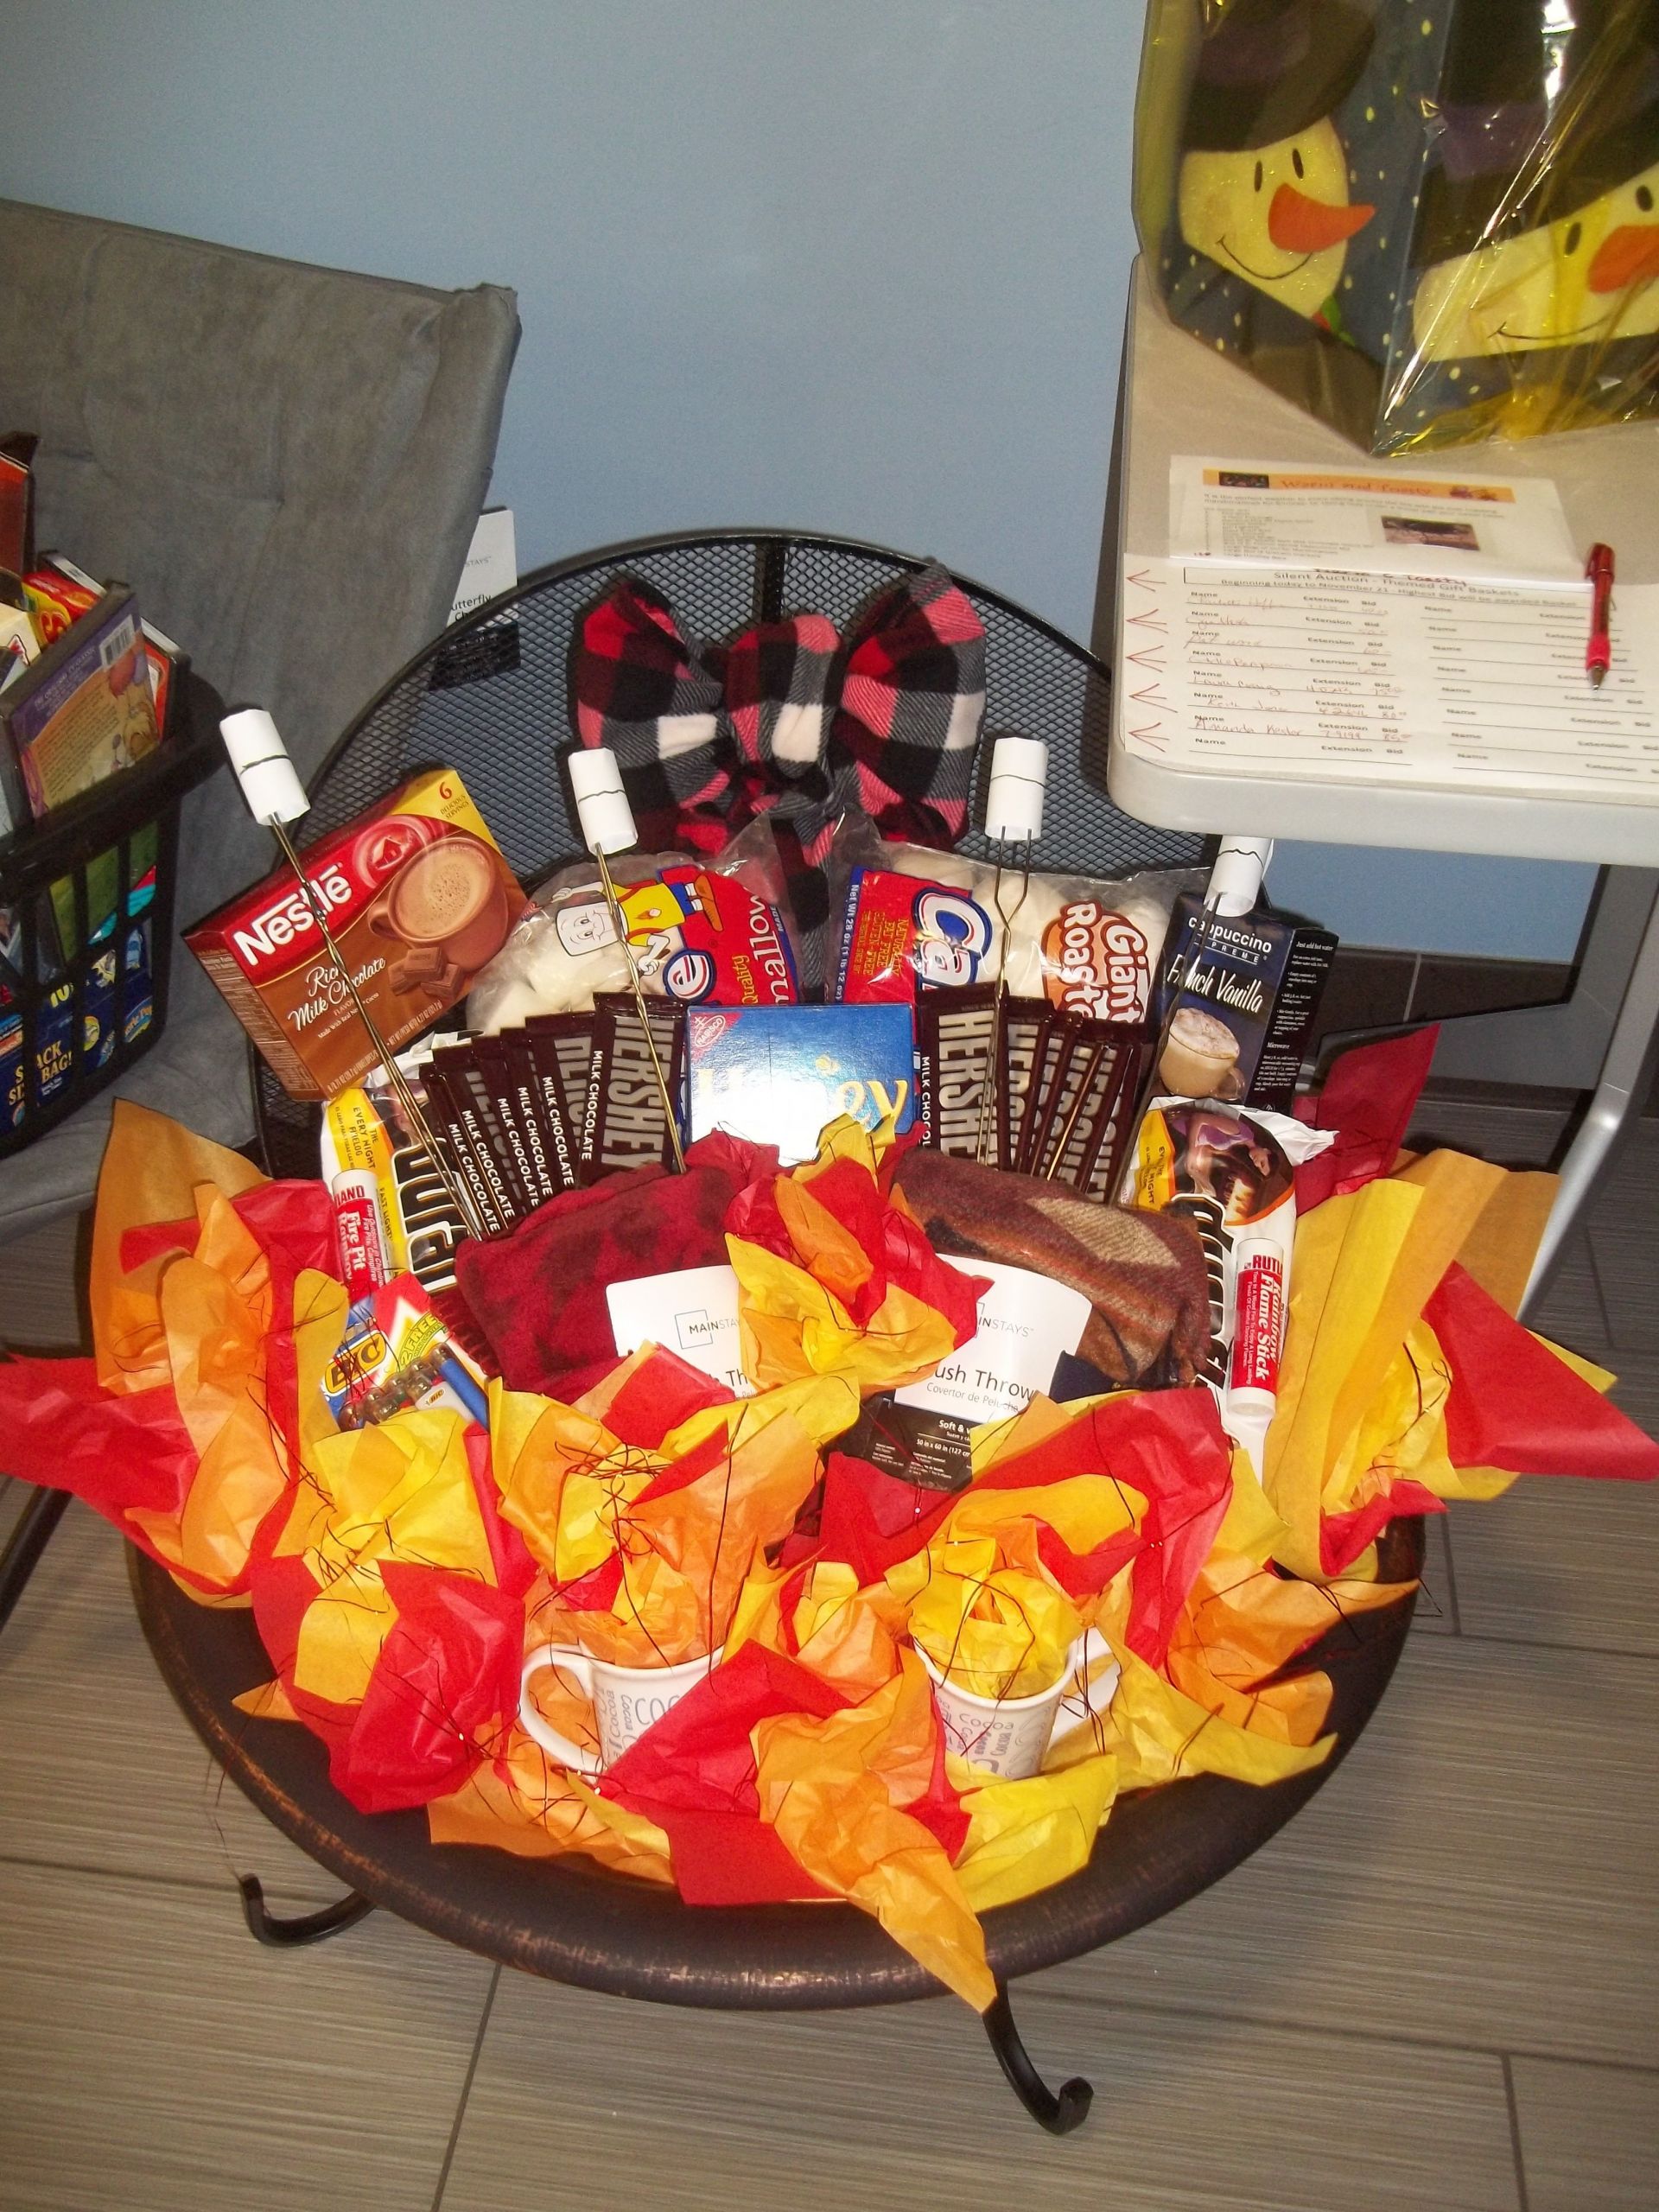 Donation Gift Basket Ideas
 Made this for a Fundraiser Silent Auction It s consist of